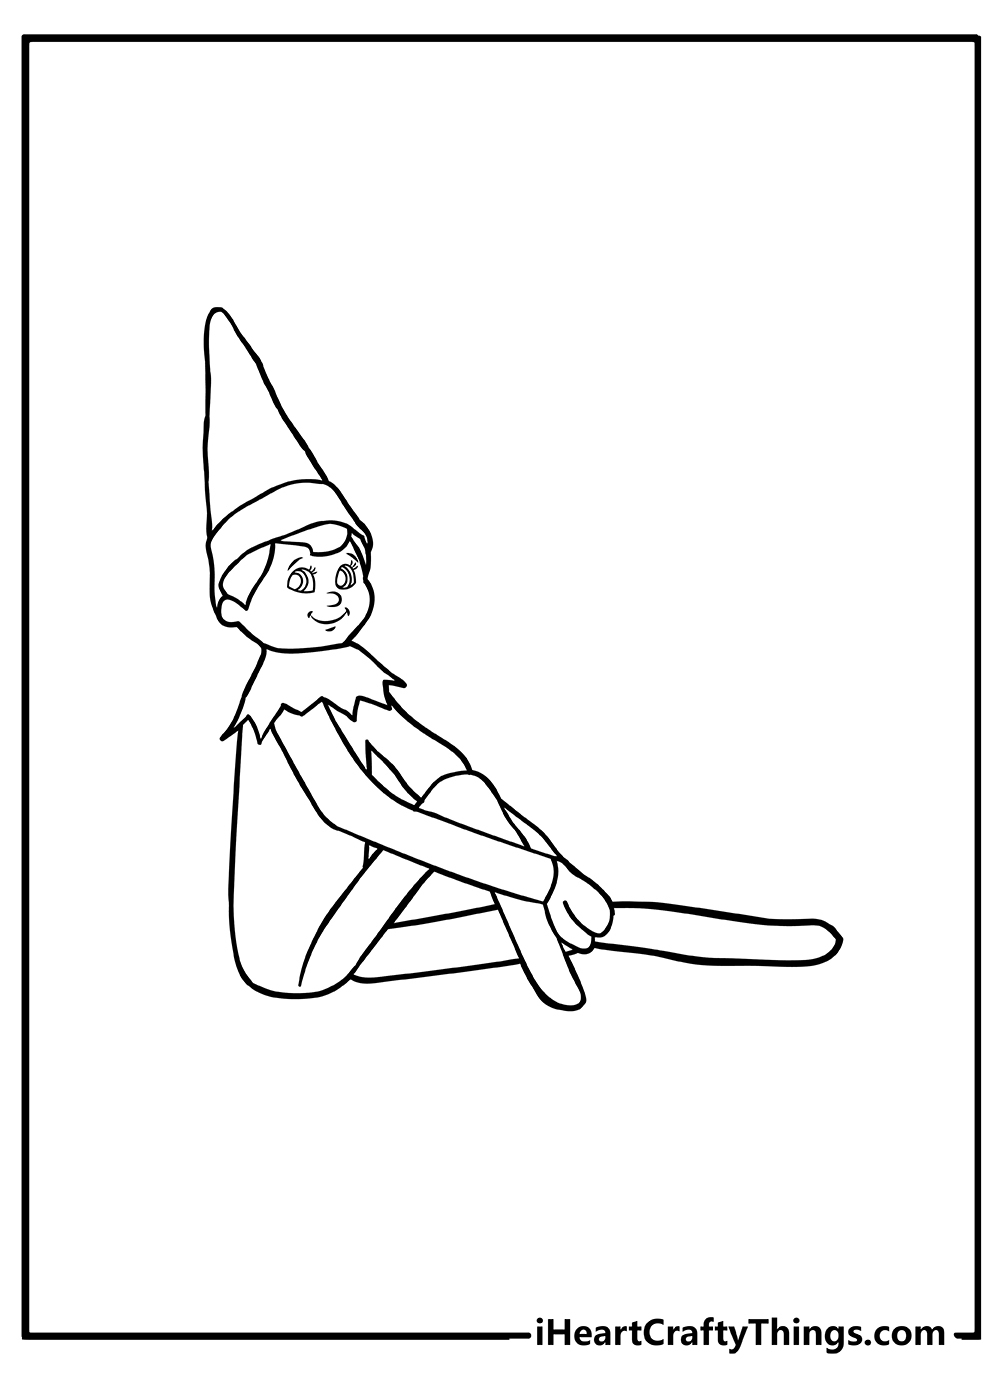 Elf on the Shelf Coloring book free printable